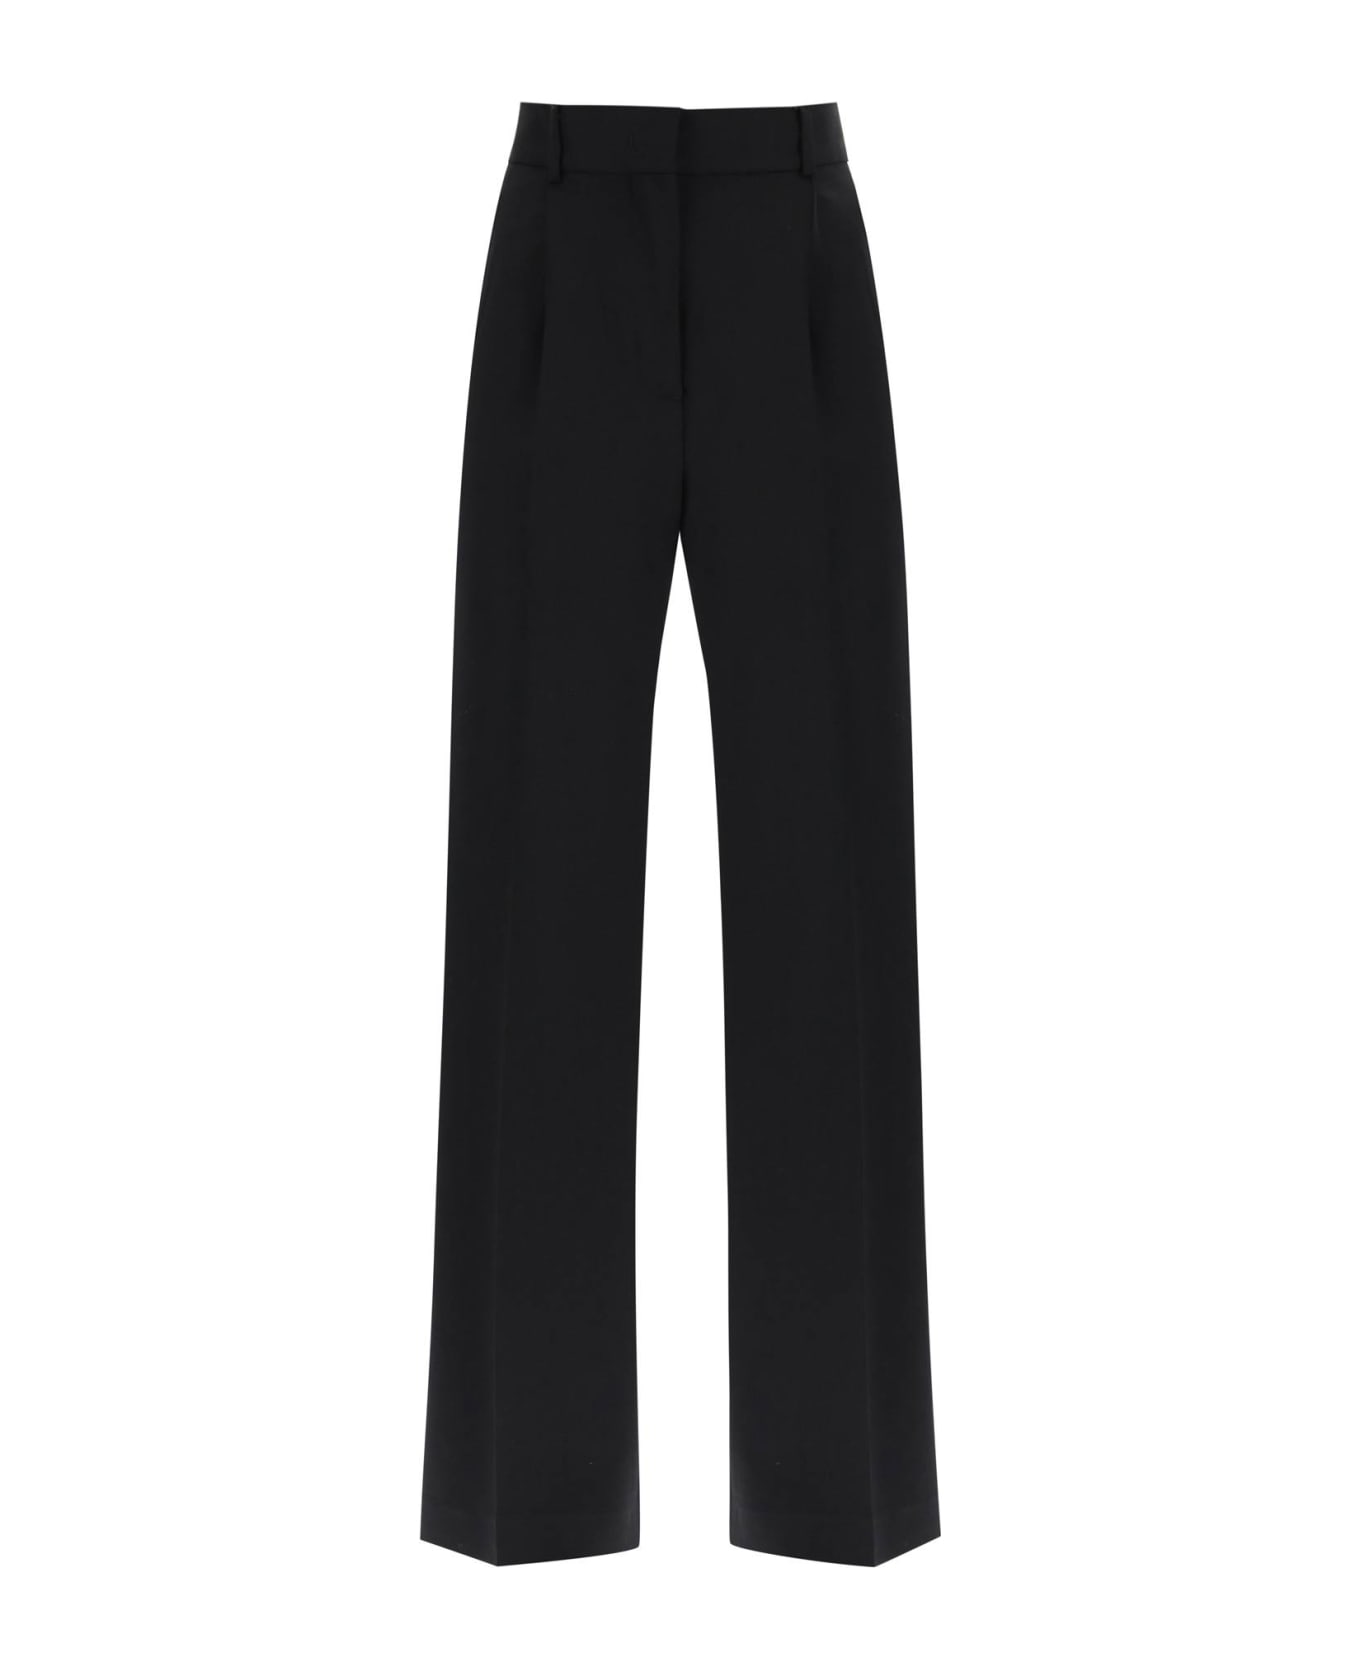 MSGM Tailoring Pants With Wide Leg - Black